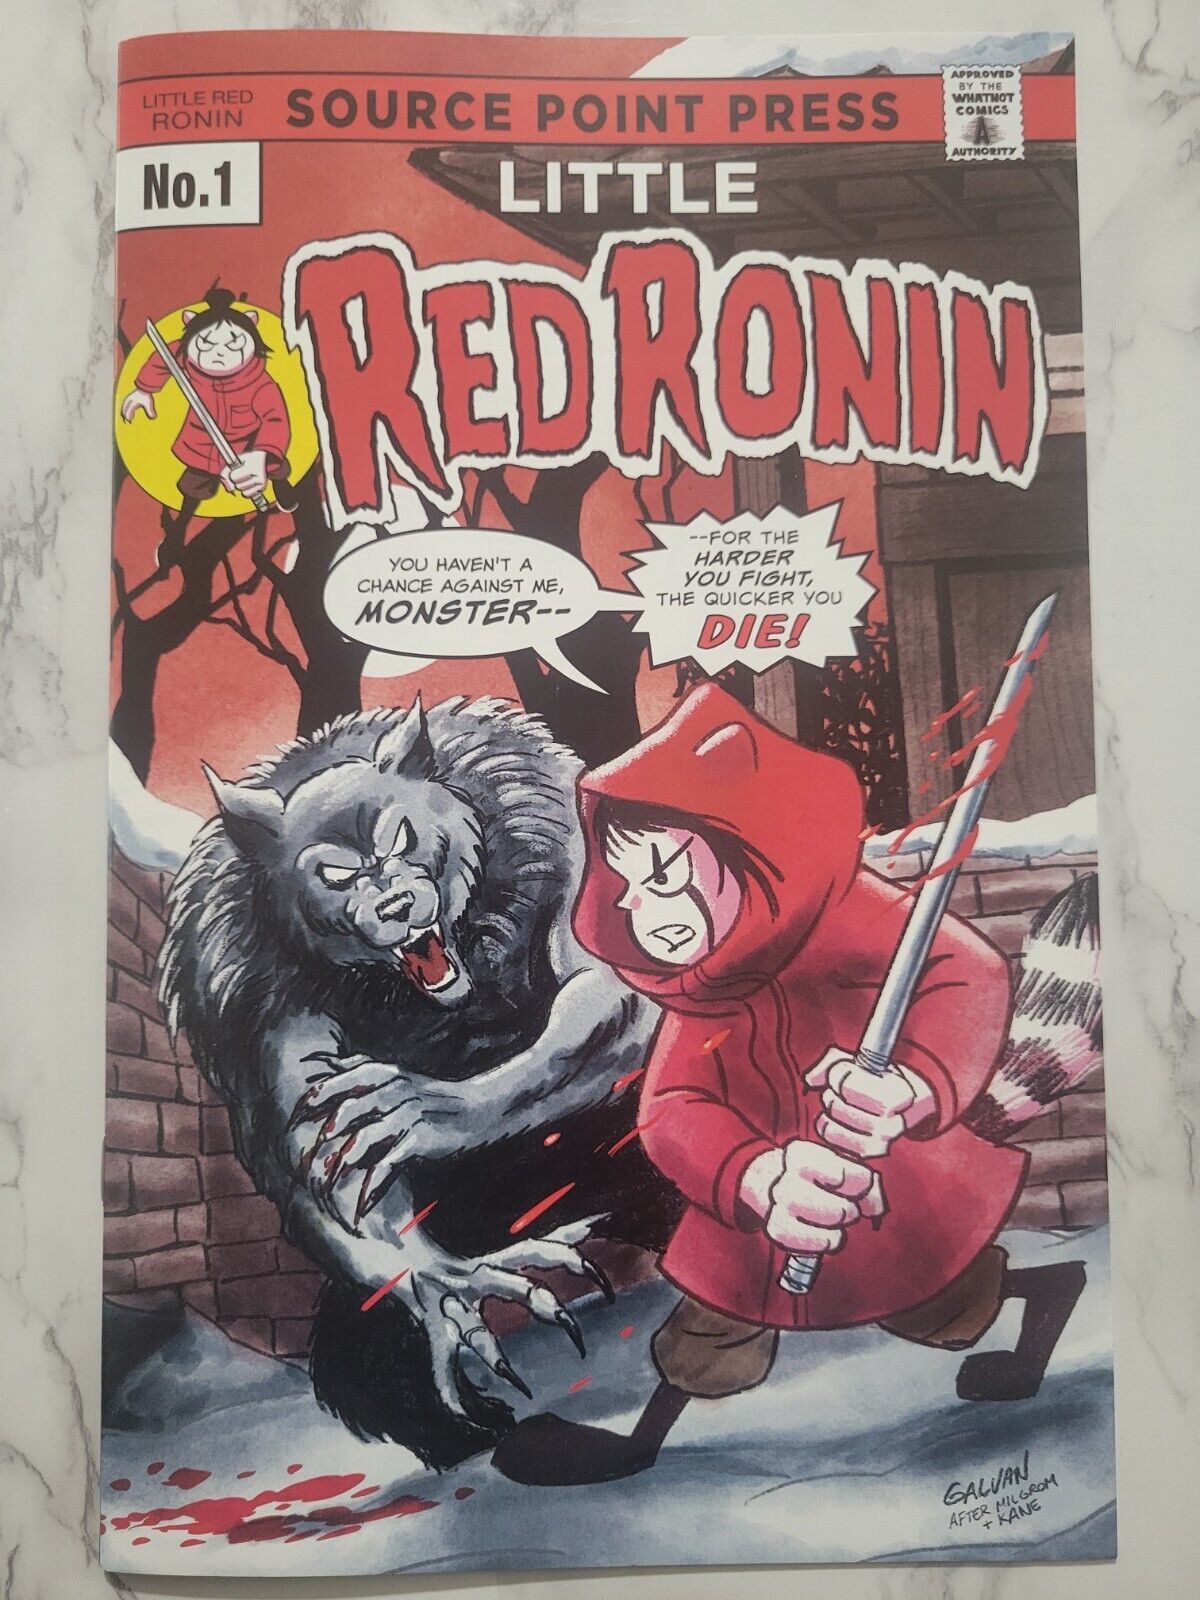 Little Red Ronin #1 Werewolf By Night Homage Trade Exclusive Edition Riding Hood